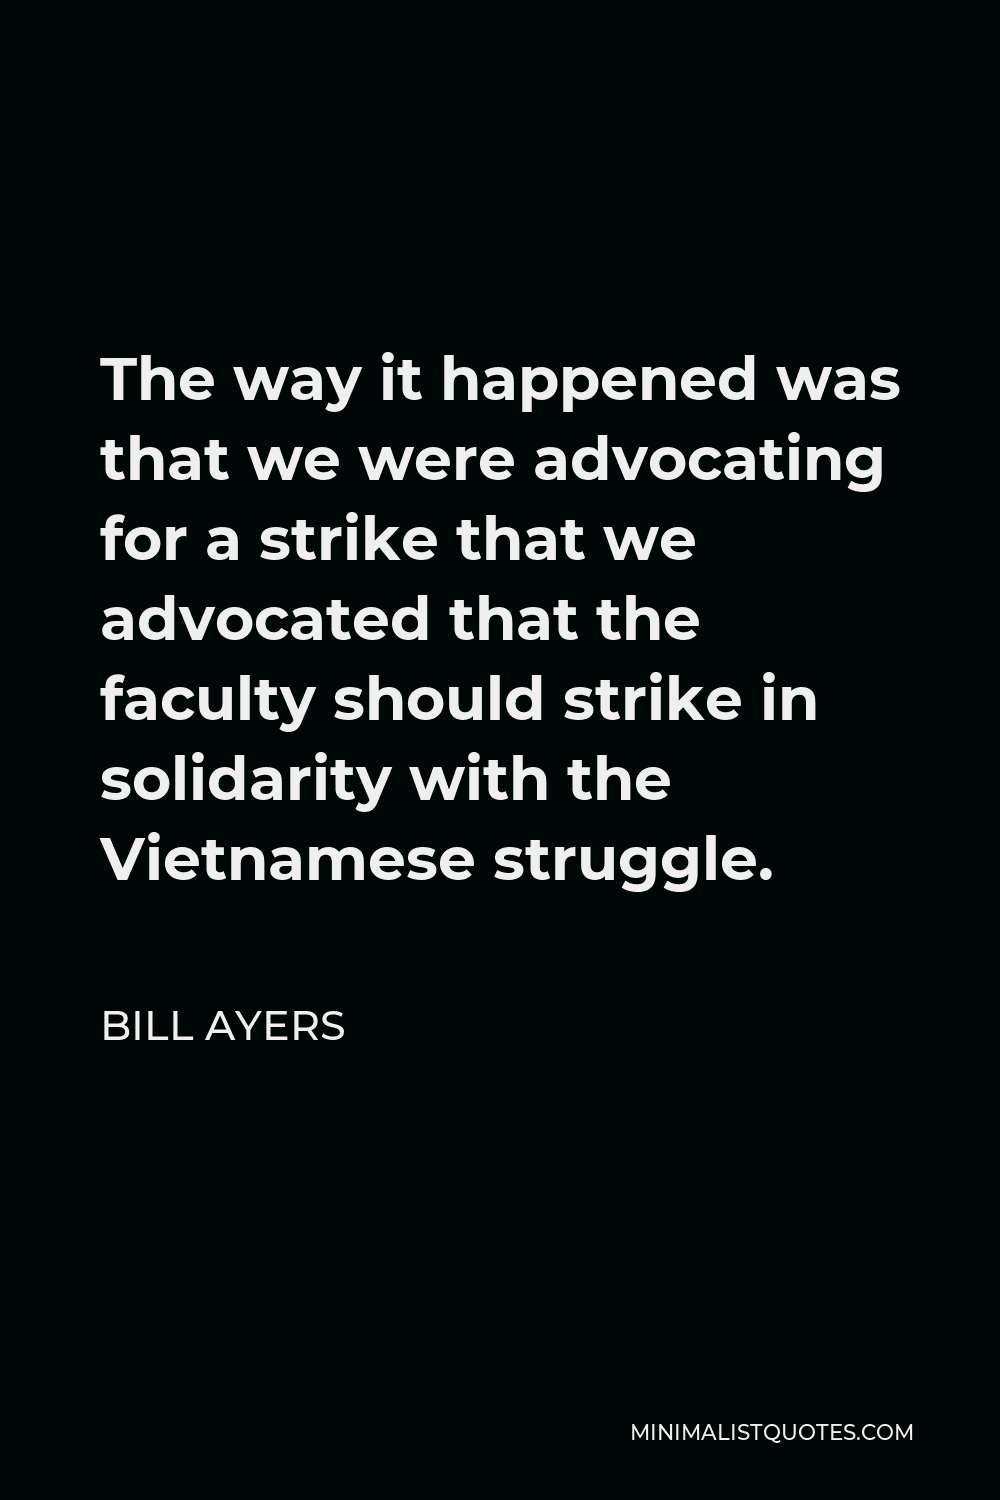 Bill Ayers Quote - The way it happened was that we were advocating for a strike that we advocated that the faculty should strike in solidarity with the Vietnamese struggle.